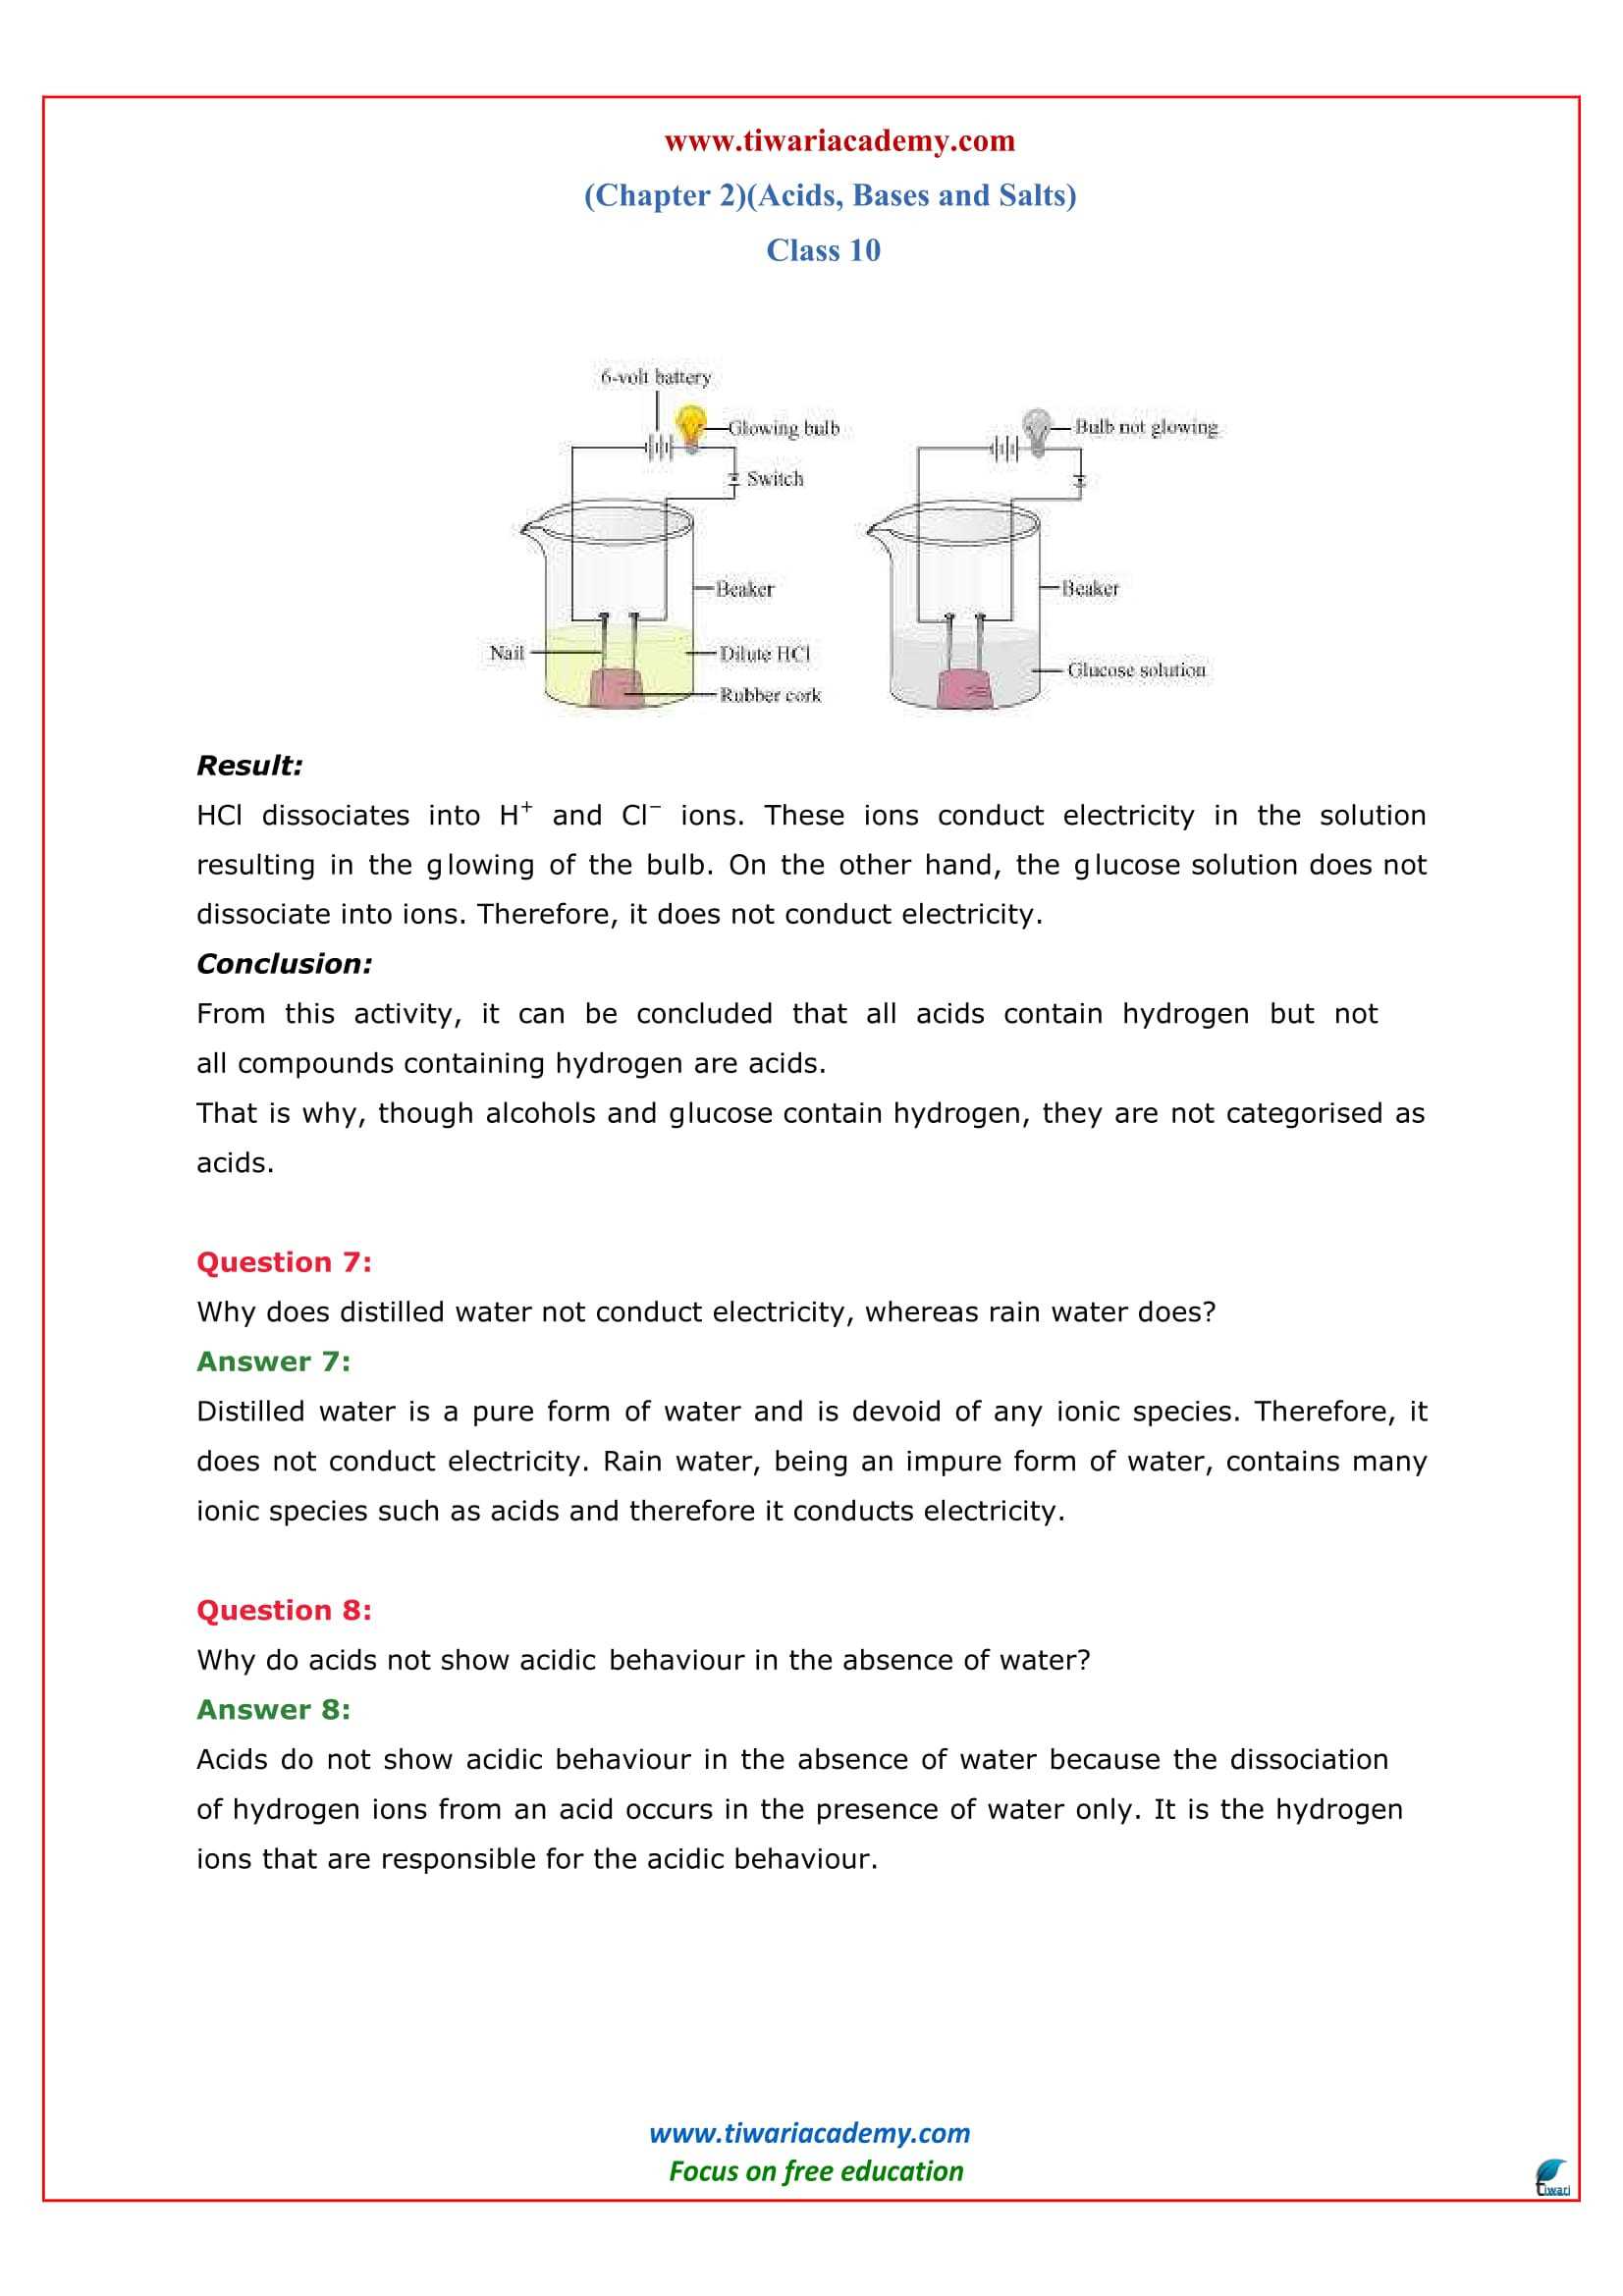 Learning Zonexpress Worksheet Answers together with Acids and Bases In Food Science Worksheet Fresh 26 Best Food Science